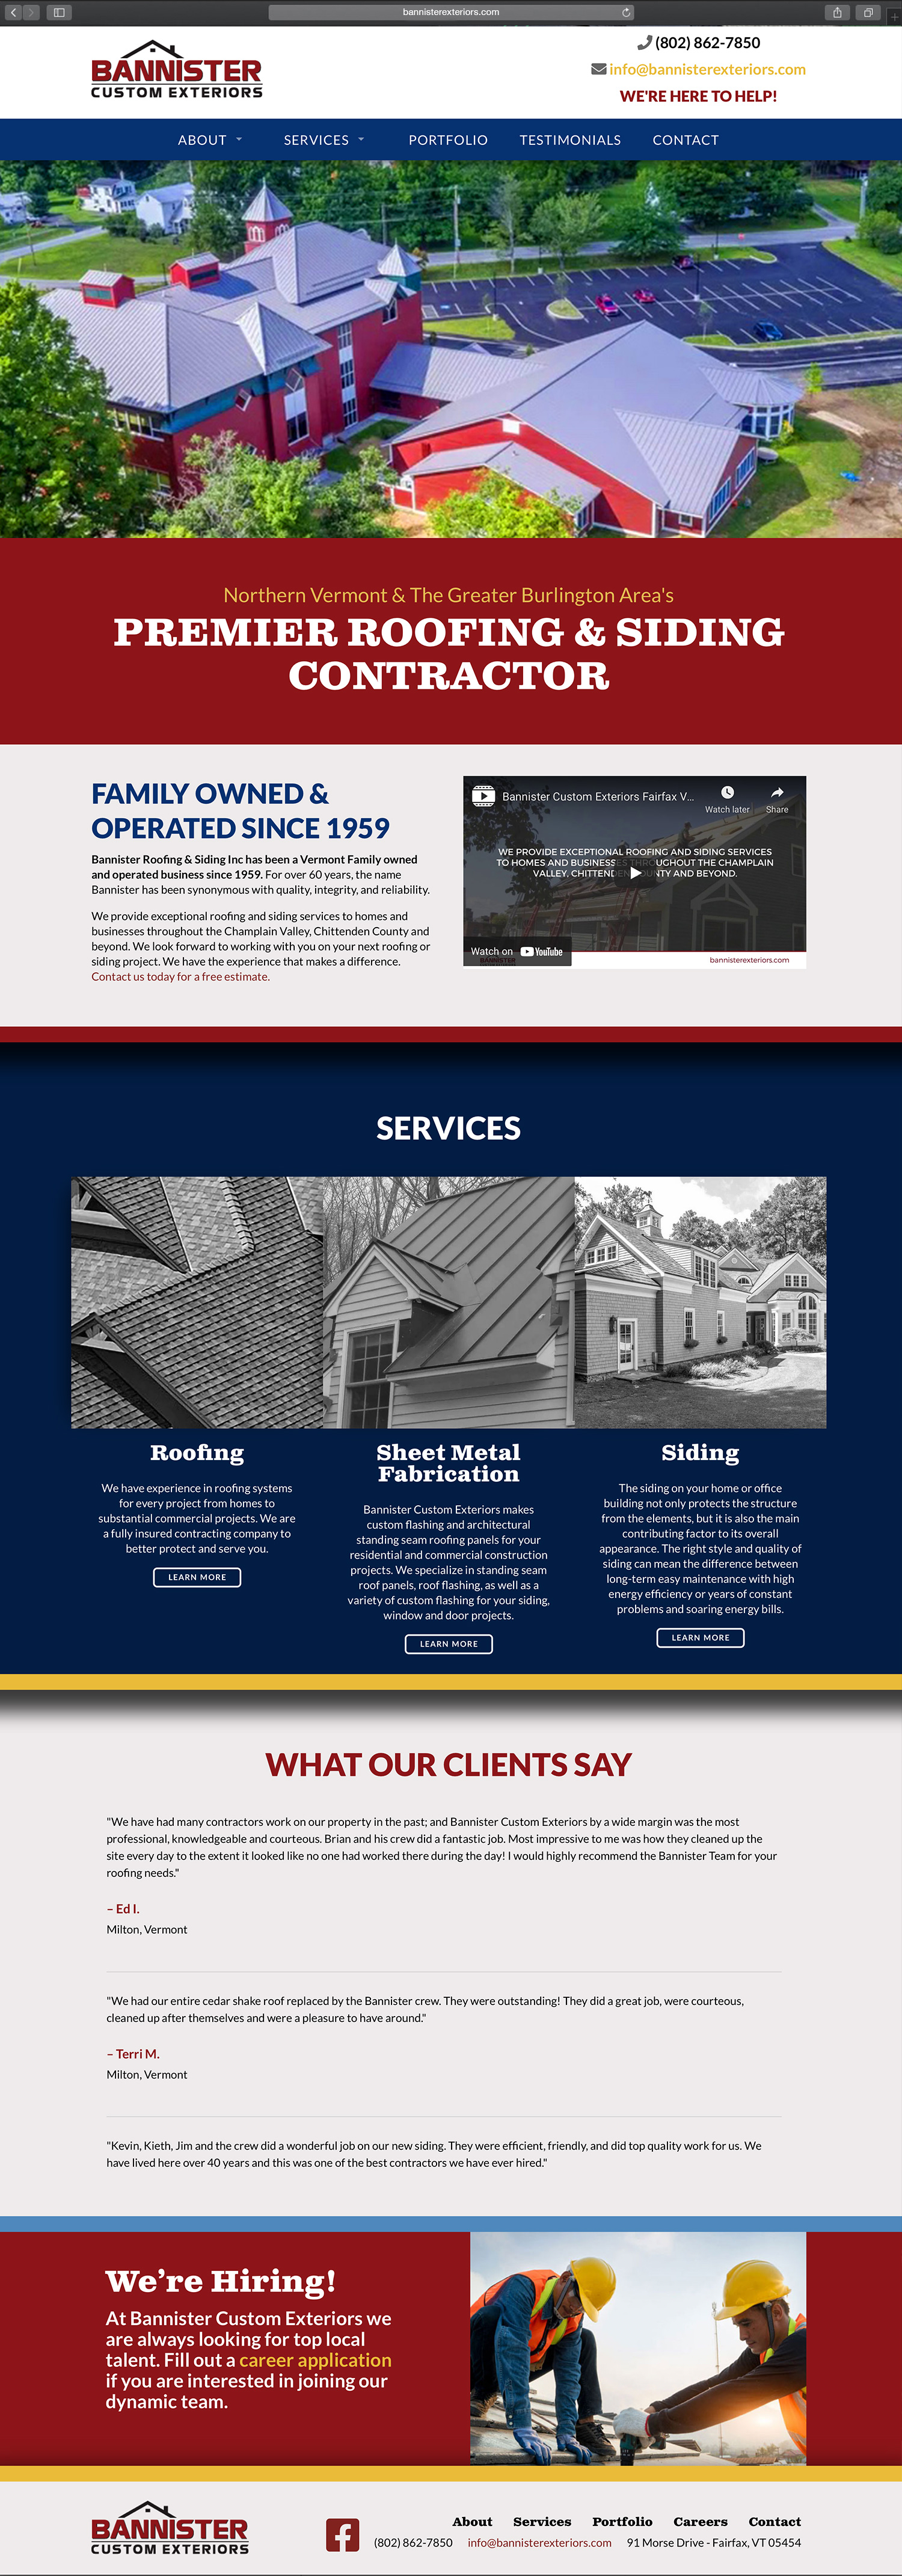 Website design and website development for Bannister Roofing and Custom Exteriors - homepage view.